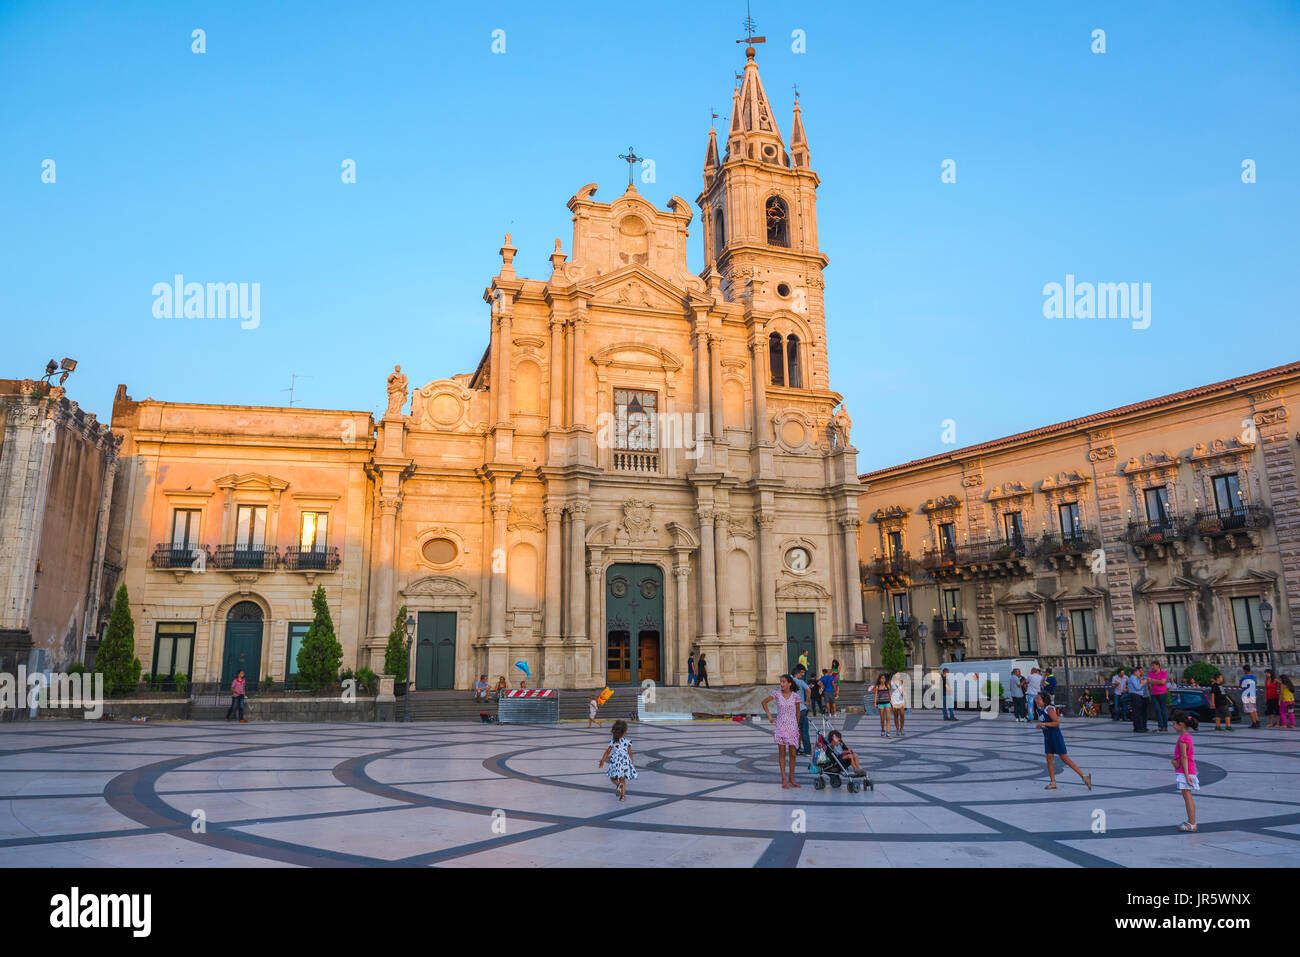 Sicily piazza children, view of children at play in the historic Piazza Duomo in Acireale, near Catania, Sicily. Stock Photo